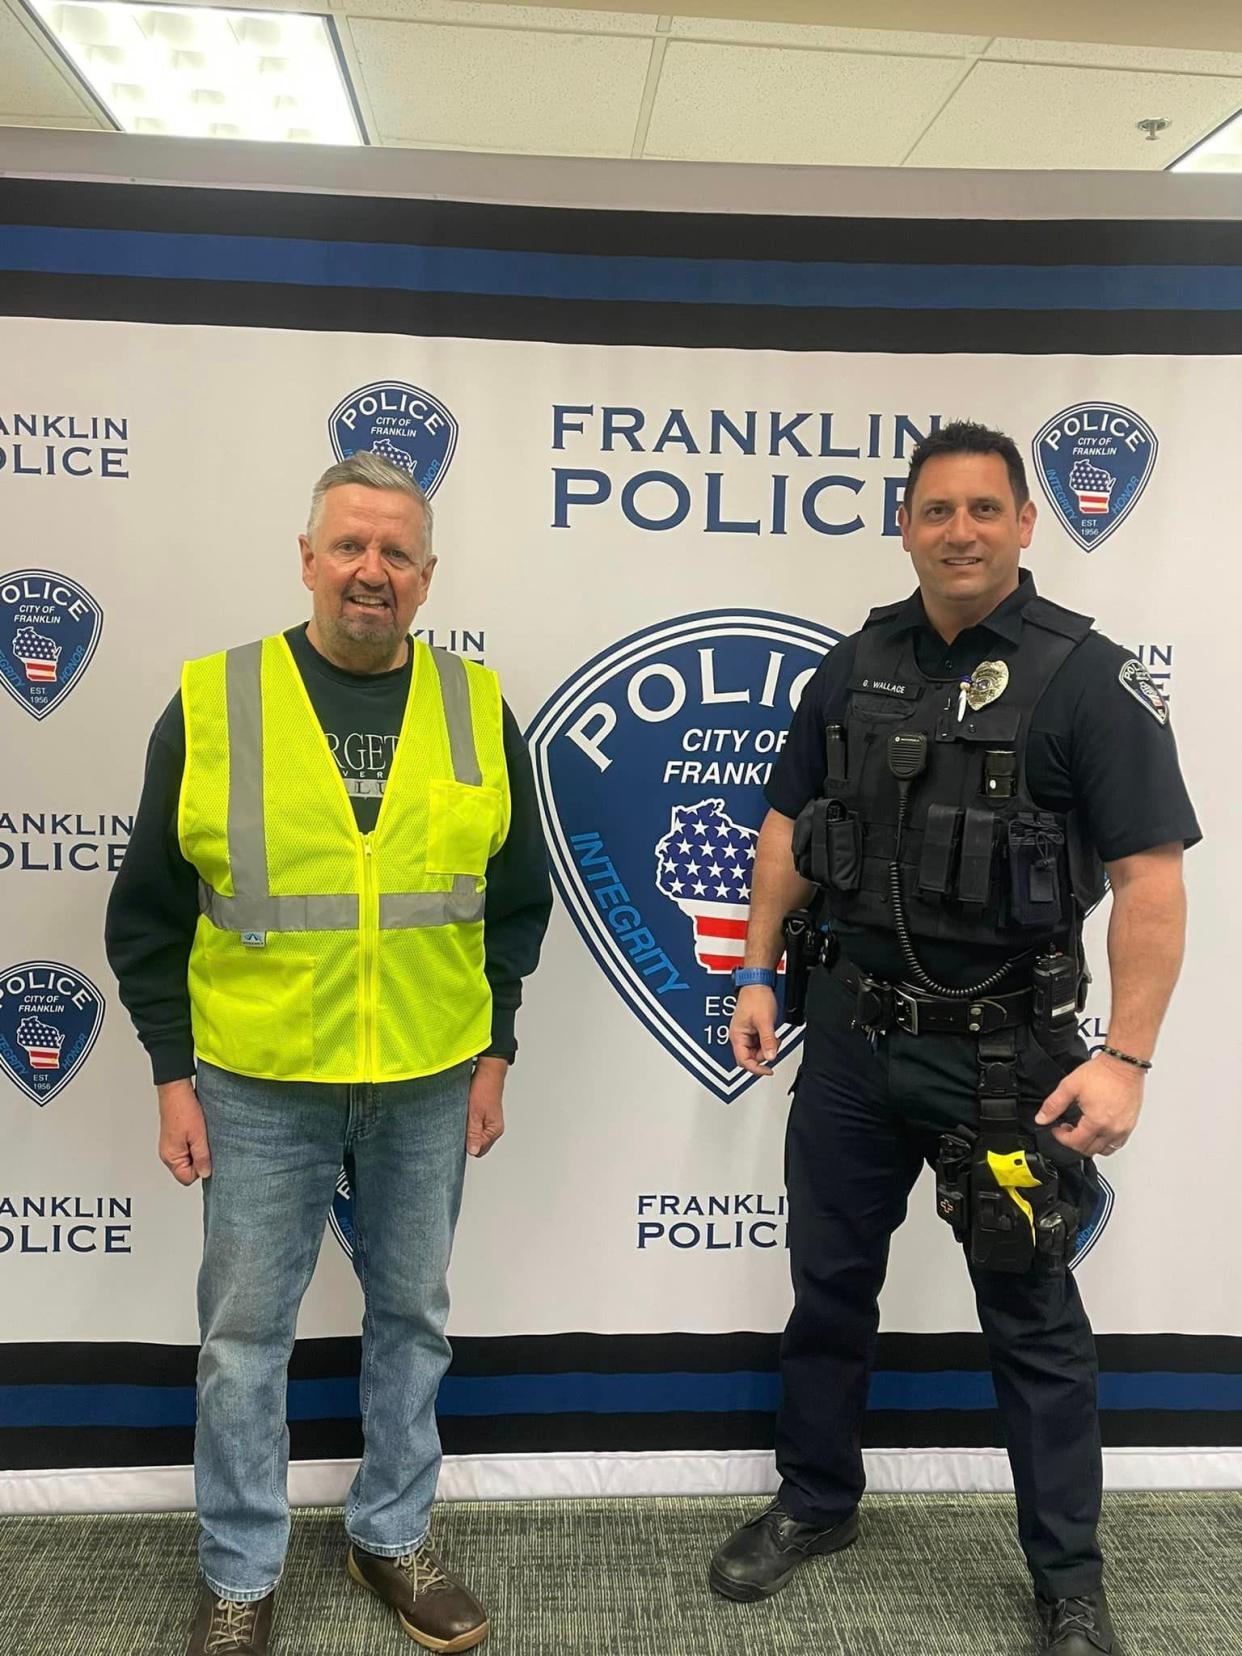 Don Schwartz (left) launched Operation: Safe Strides to distribute reflective vests to residents in Franklin. Schwartz is shown with Franklin Police Officer Gary Wallace who helped with the effort.